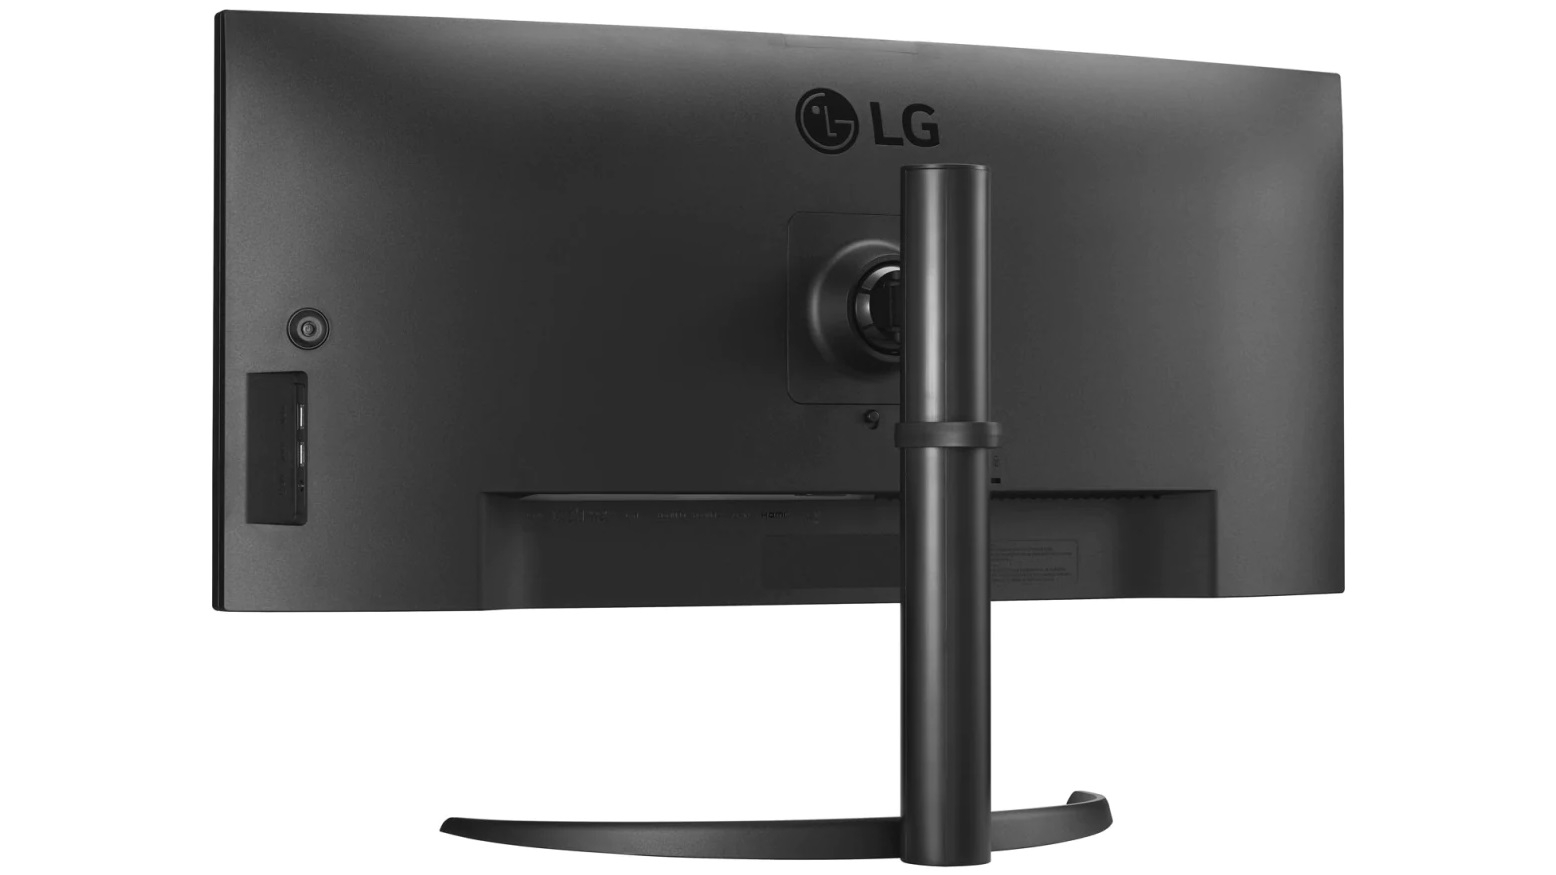 LG UltraWide Curved Monitor 34WR50QC 34 inch 1440p 100Hz 5ms GtG